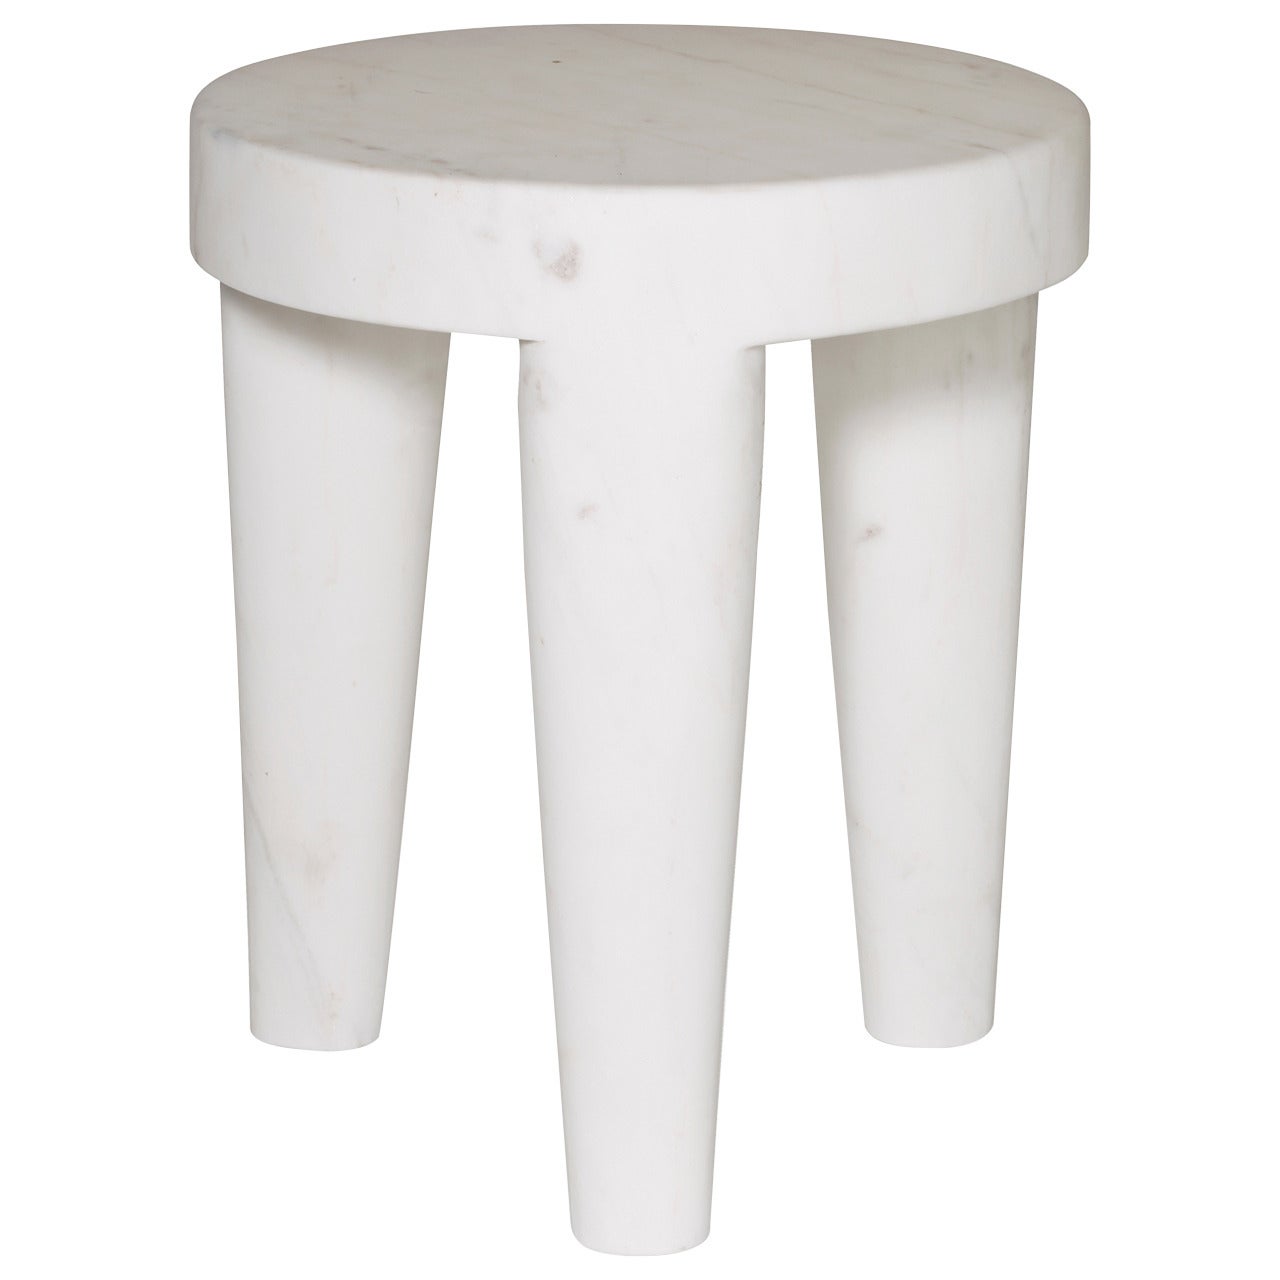 Large Tribute Stool in Calacatta Marble